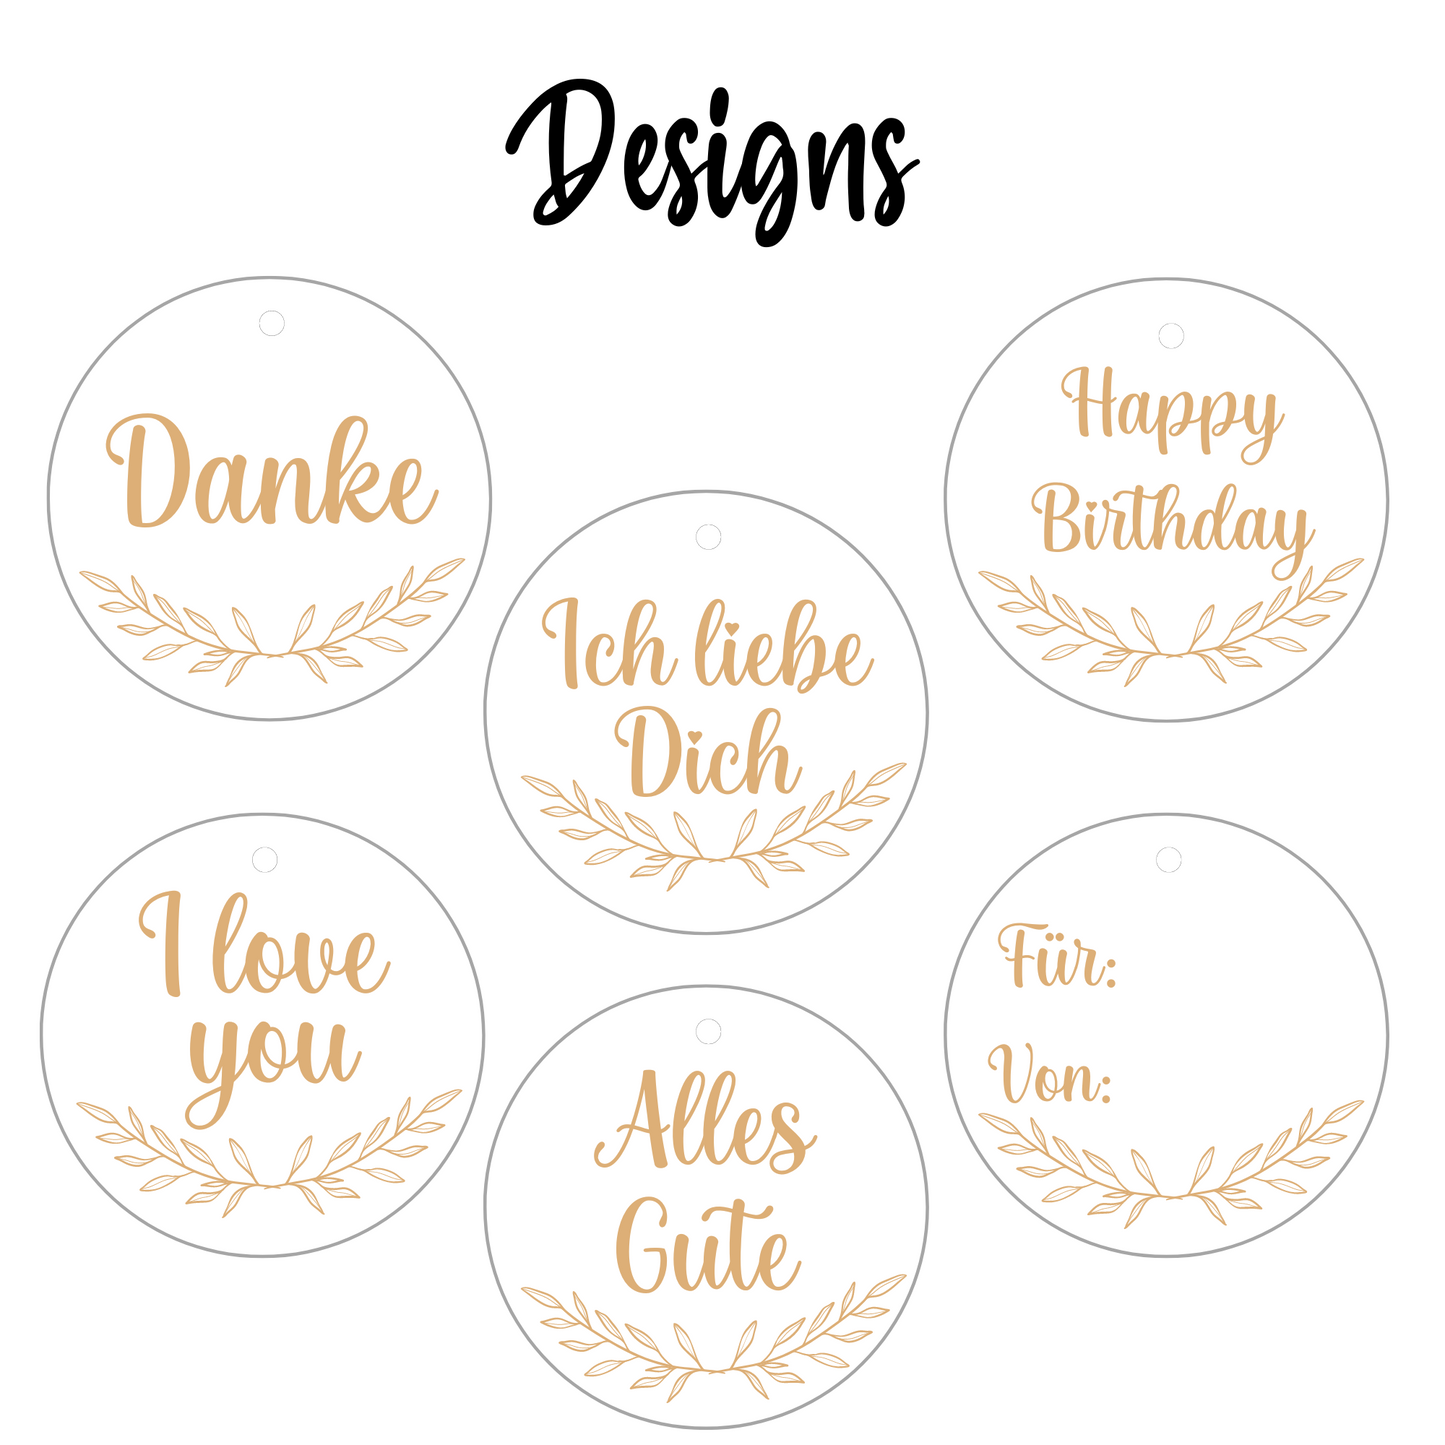 Round wooden gift tag - thank you tag - personalized round wooden gift tag